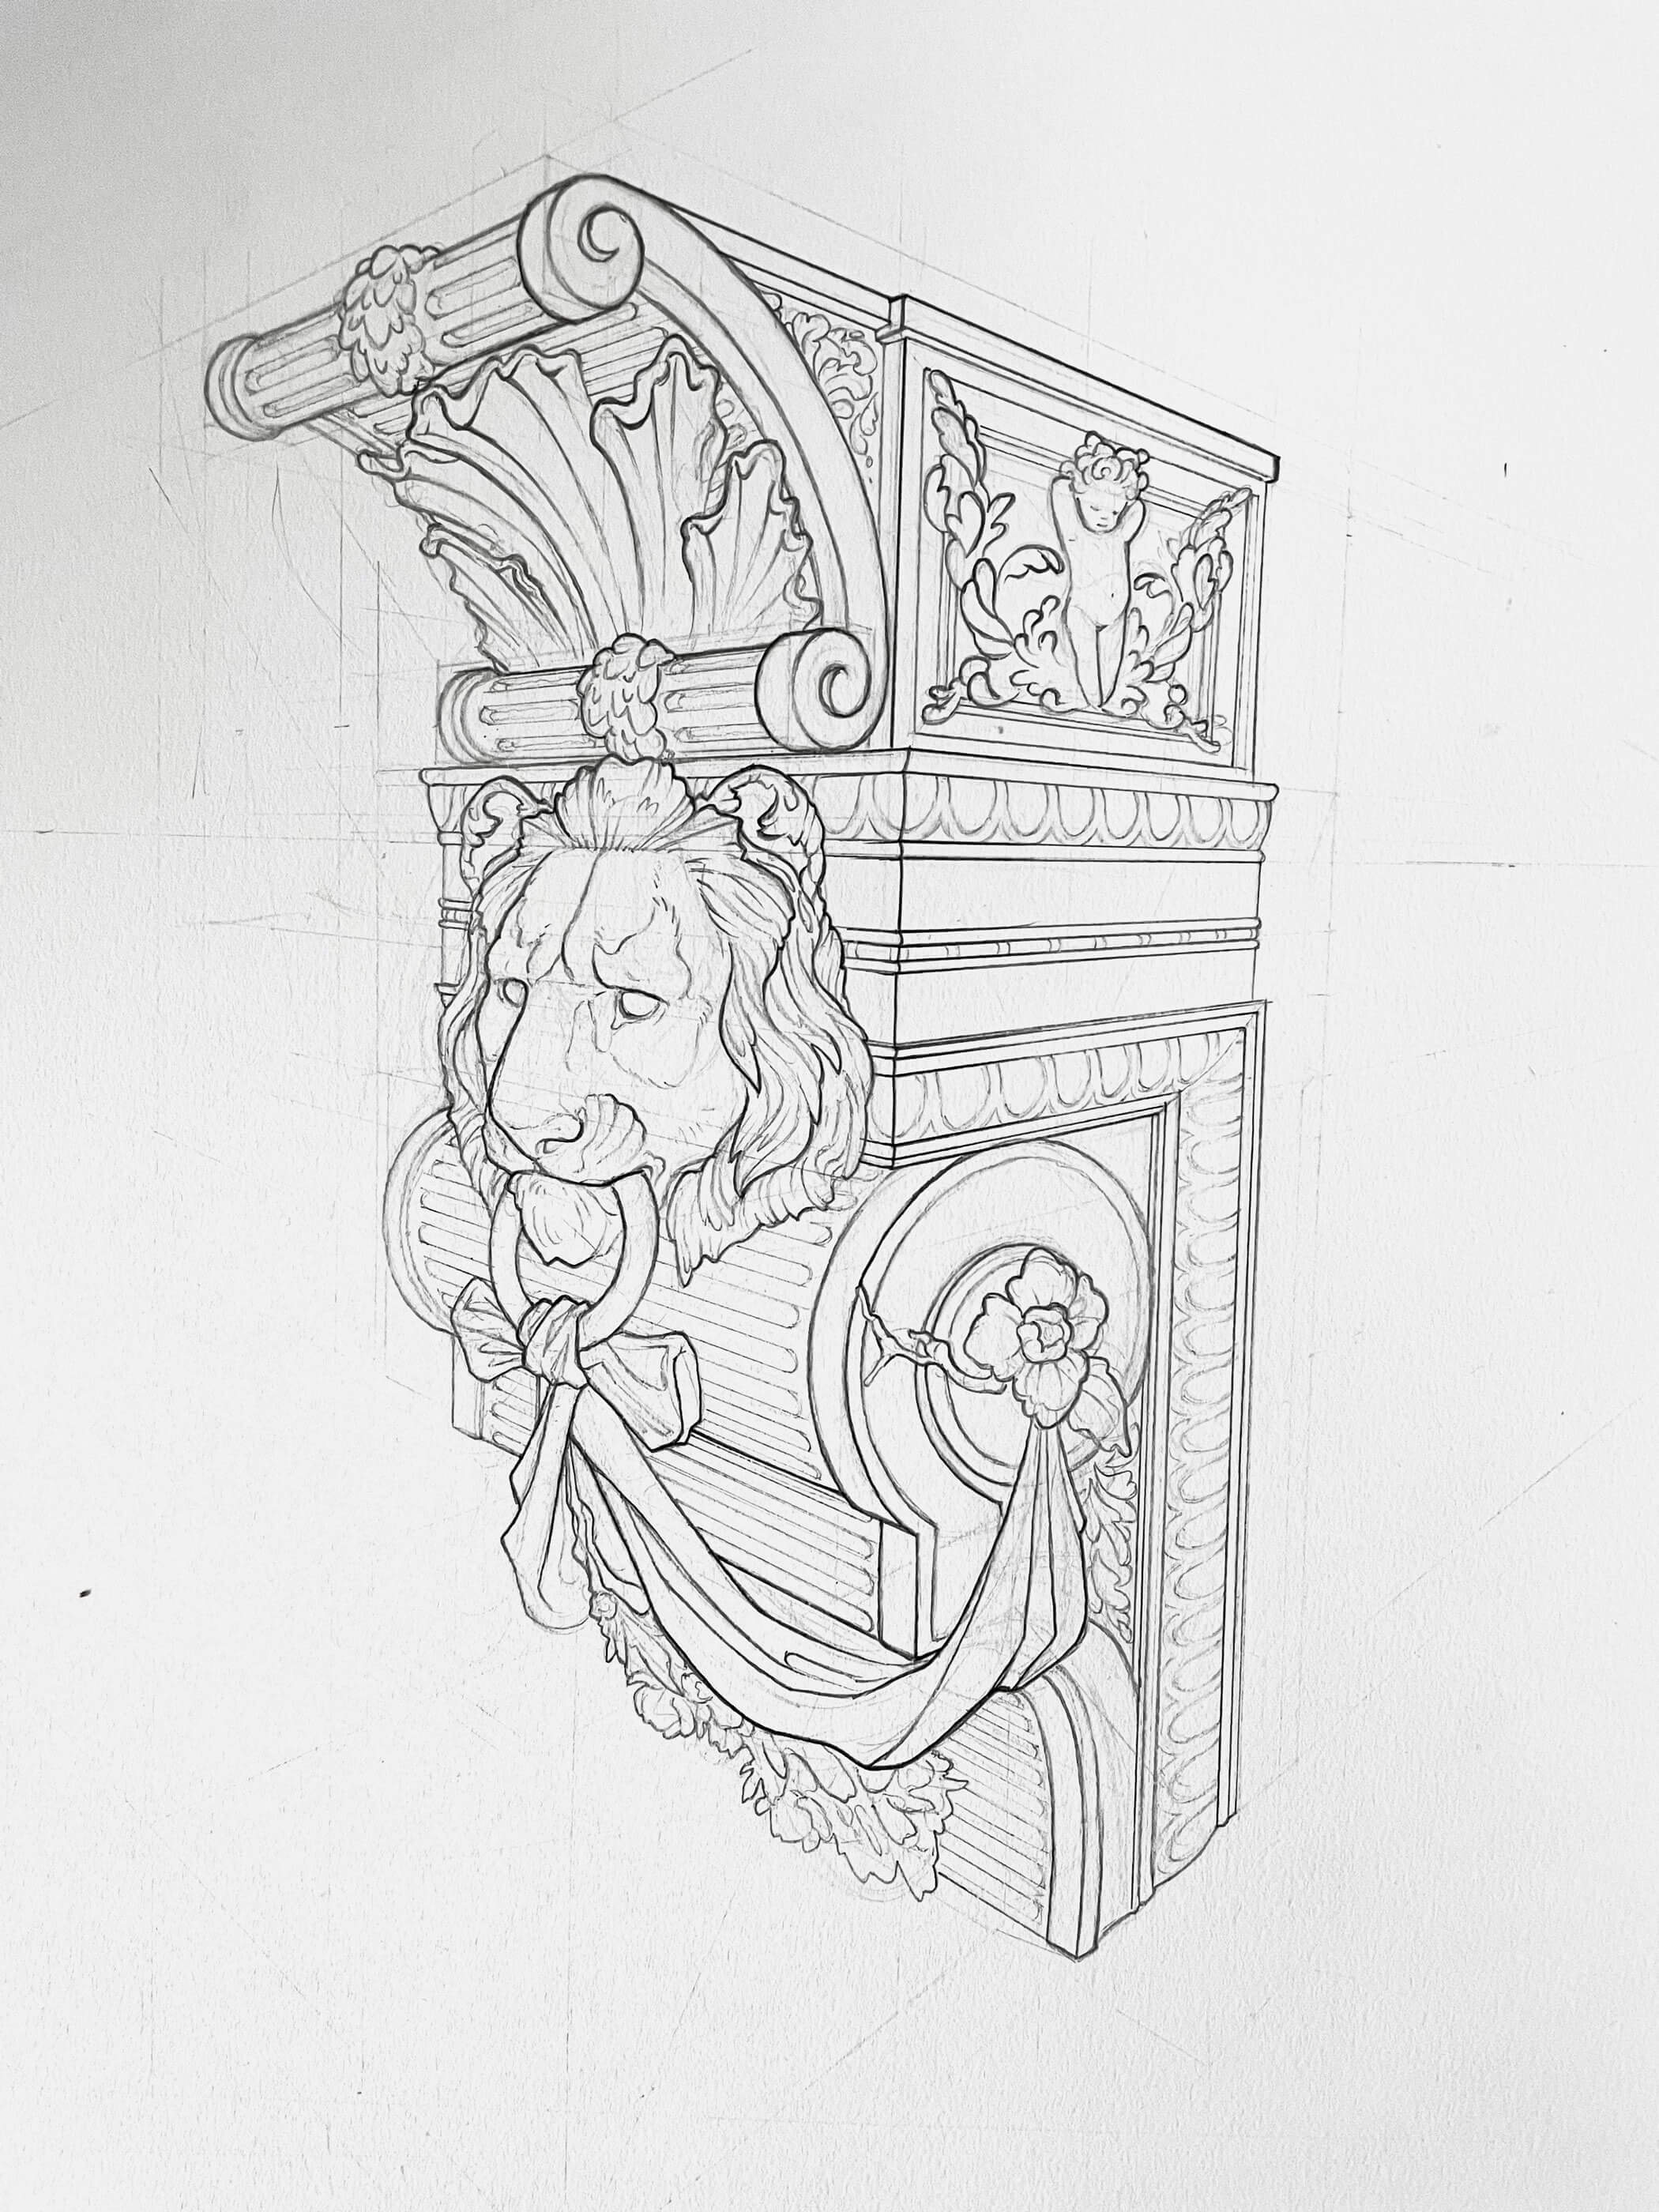 Sketch of a fancy engraved pillar with a sculpted lion head.